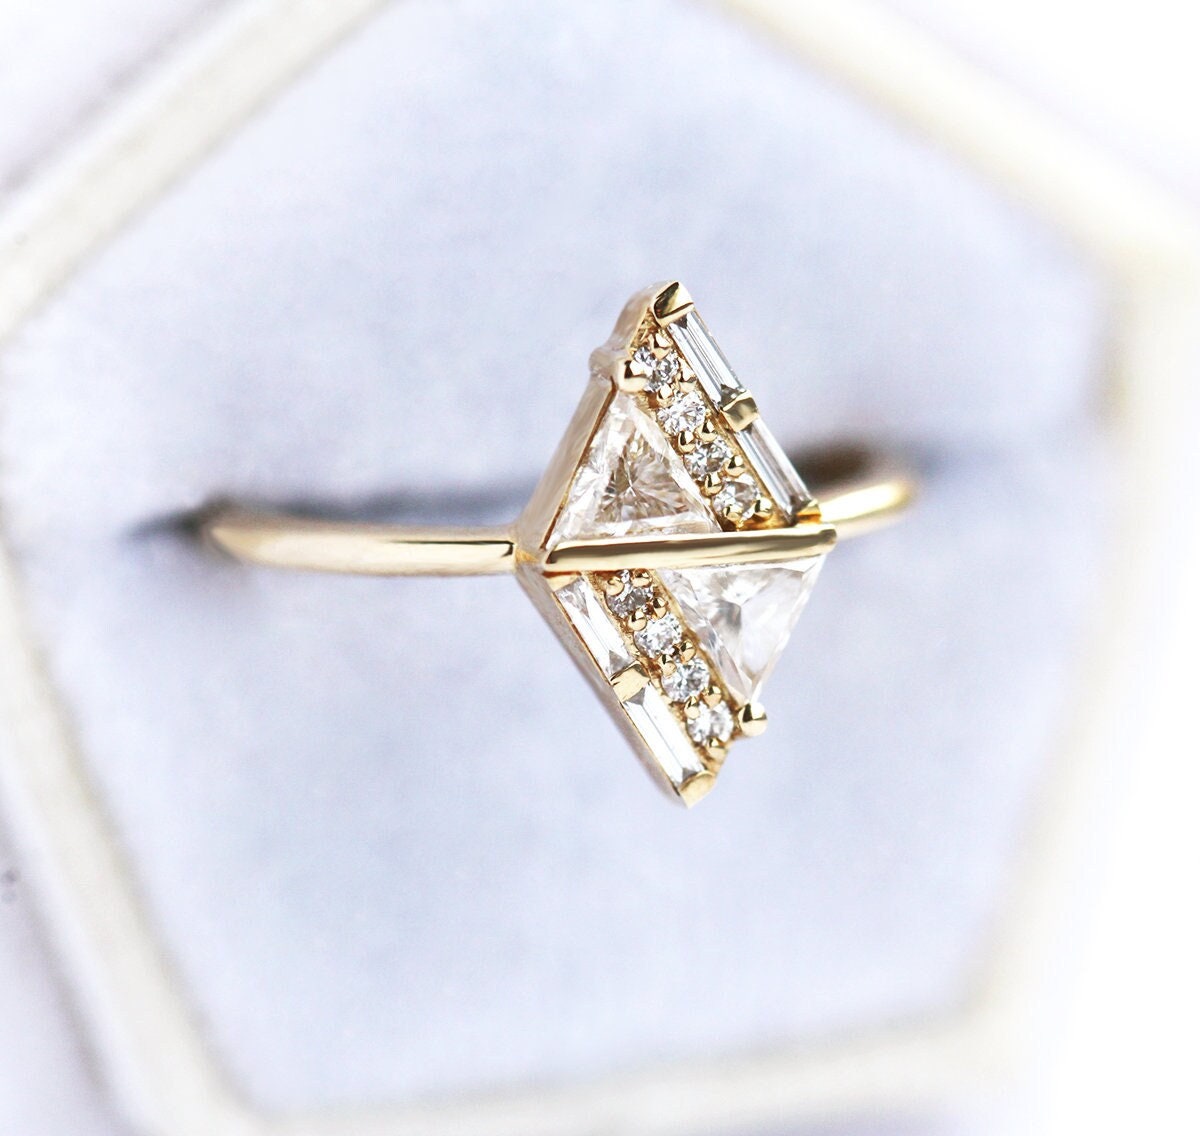 Art Deco inspired White Diamond Ring, with Triangle, Round and Baguette Cut Diamonds forming altogether a triangle shape